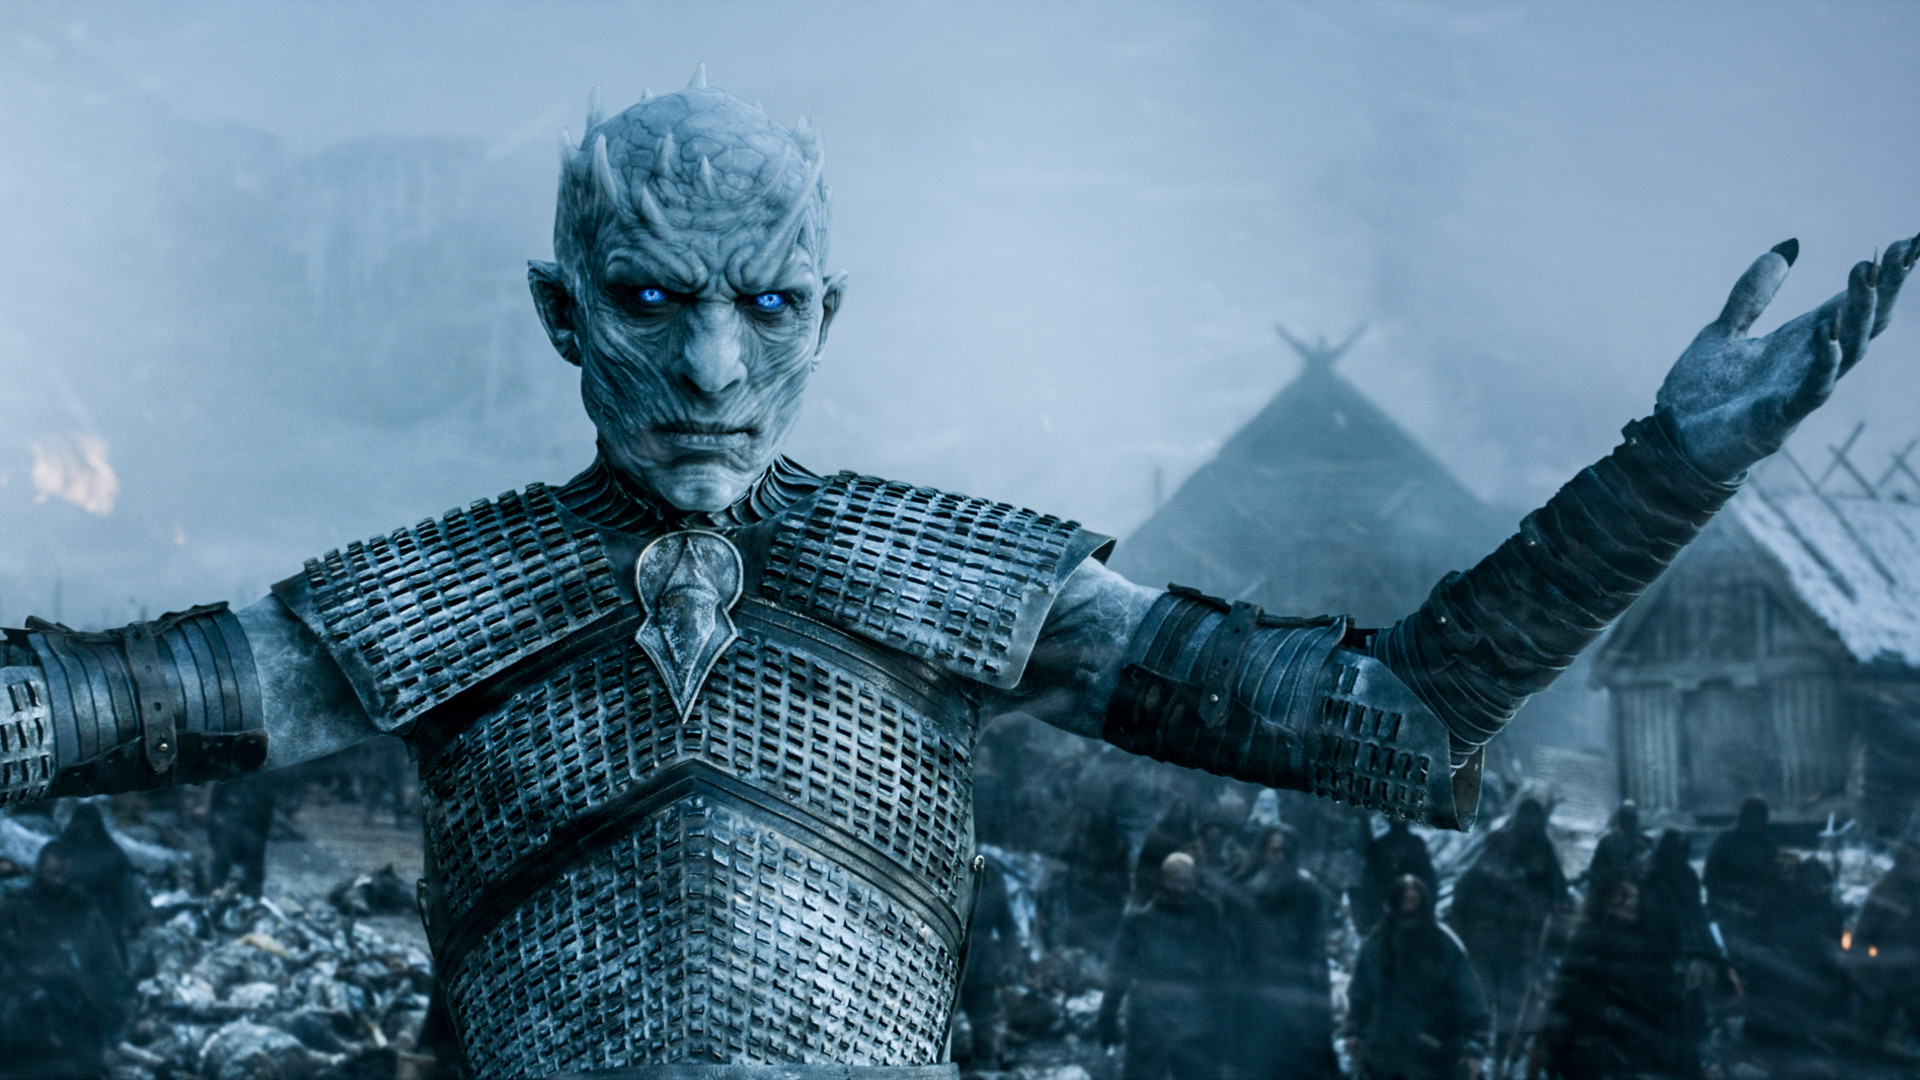 1920x1080 Gallery Rollup Icon The White Walker King Glares on Game of Thrones Season  5, Episode 8